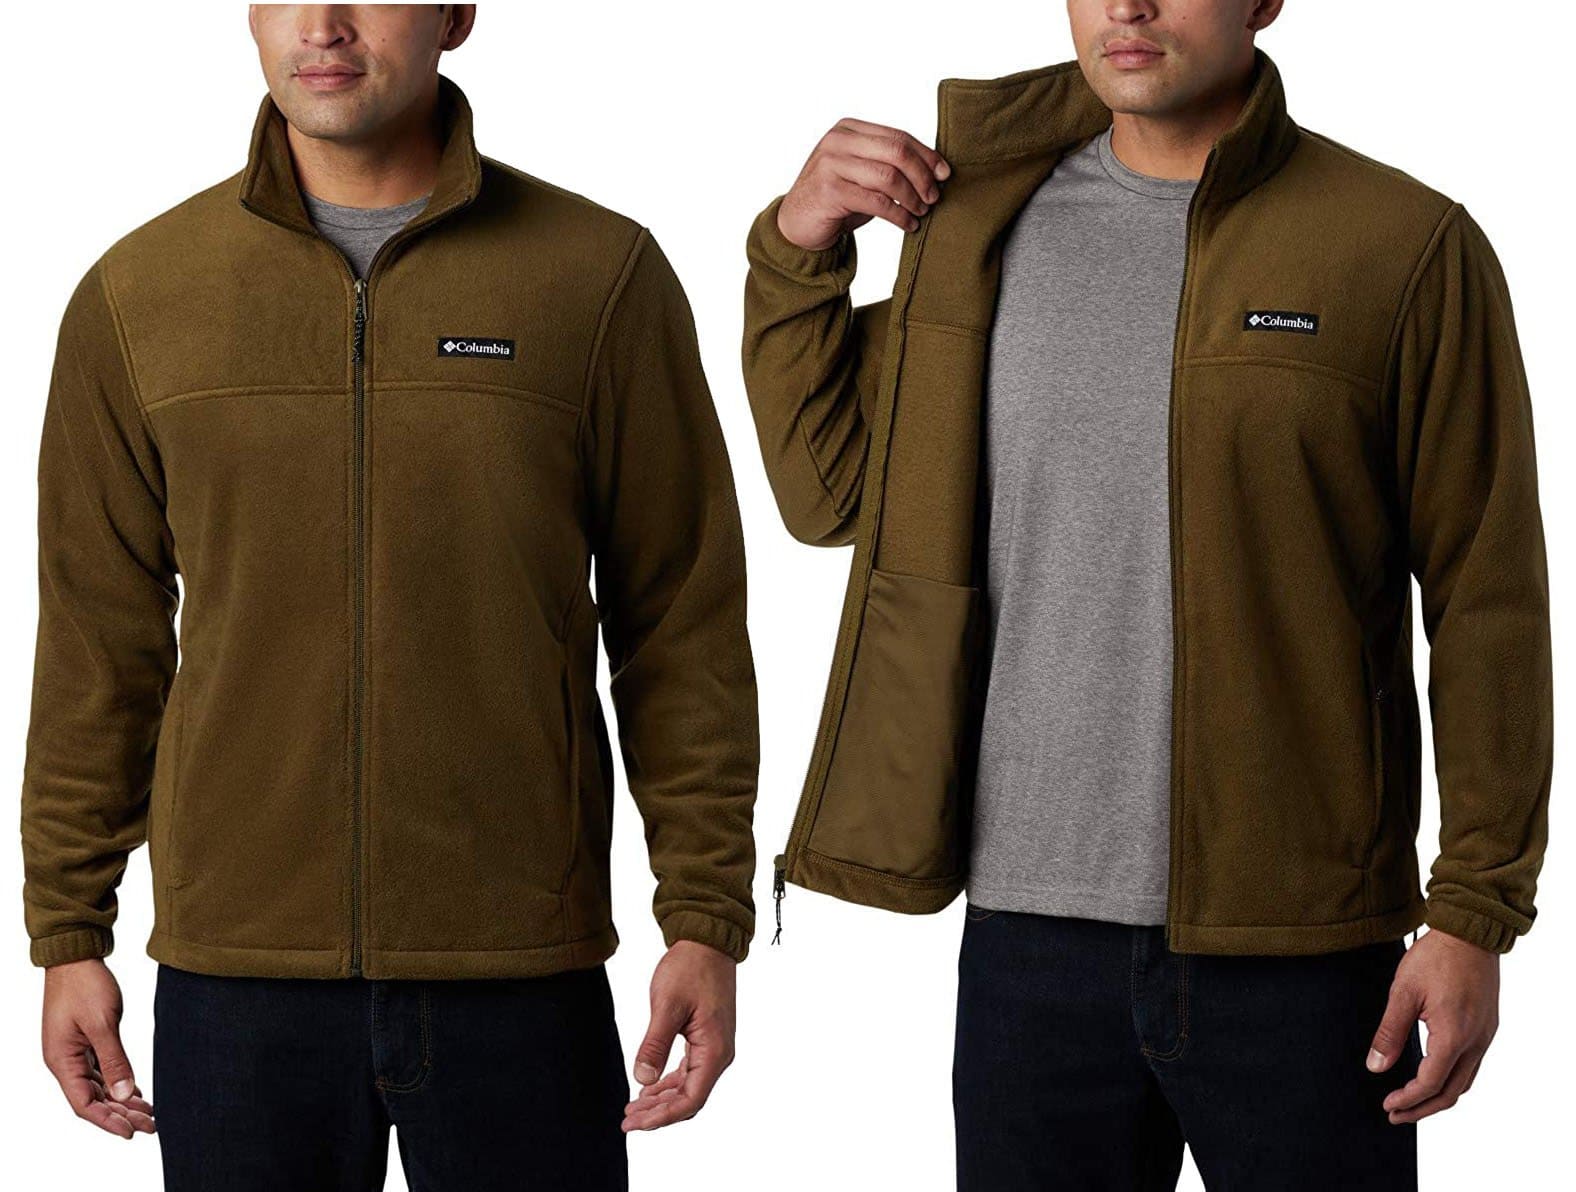 The Steens Mountain jacket is available in solid and two-tone colorways